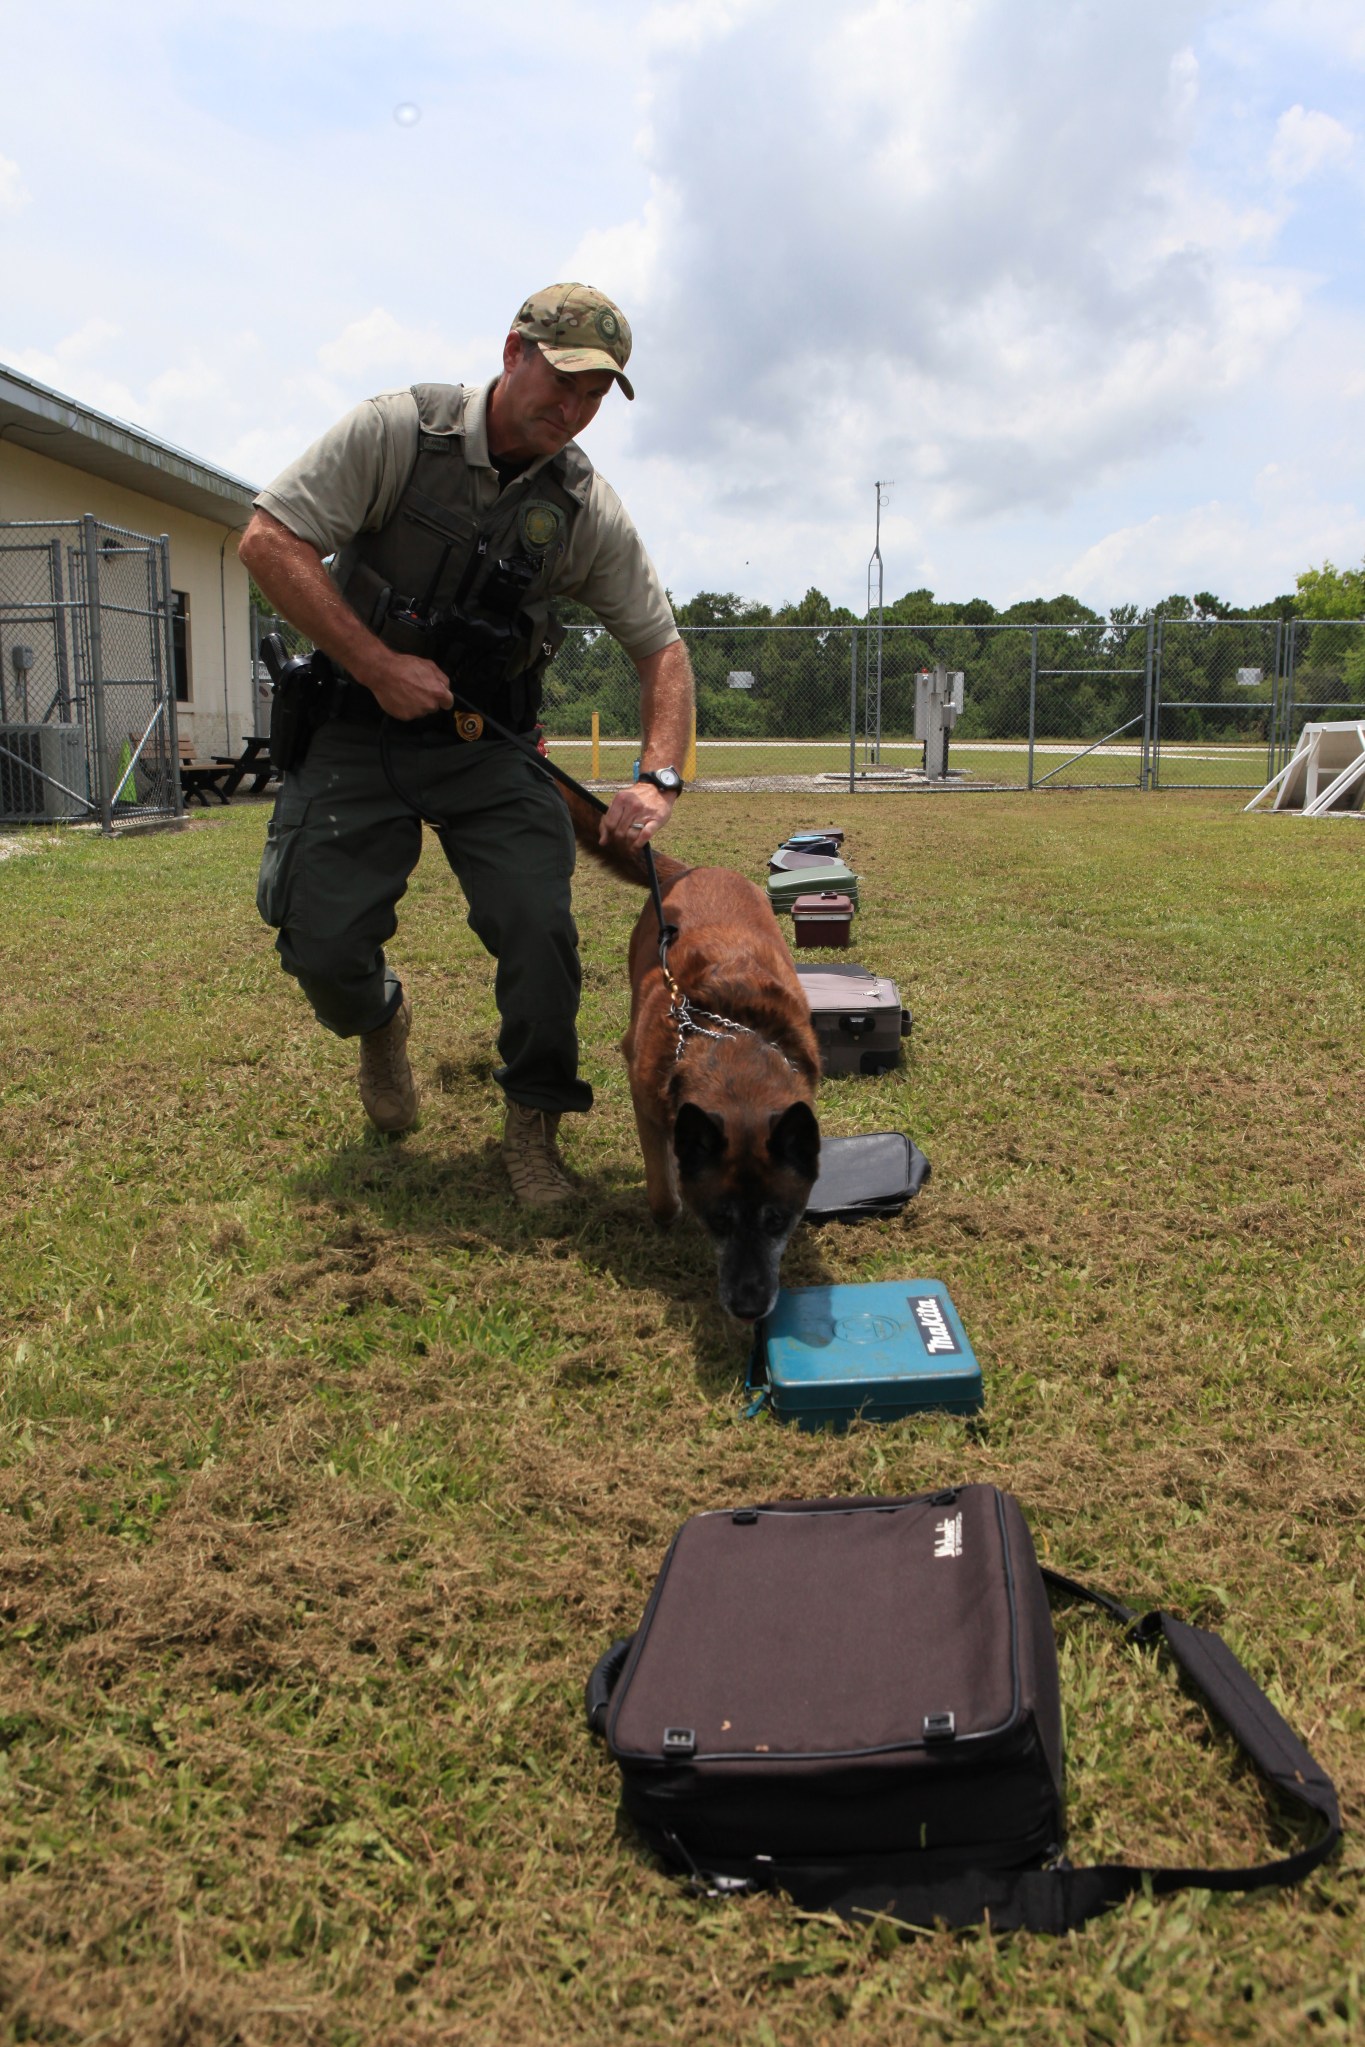 K-9 Officer Scott O’Rourke watches as K-9 LJ works his way through a row of bags and containers.